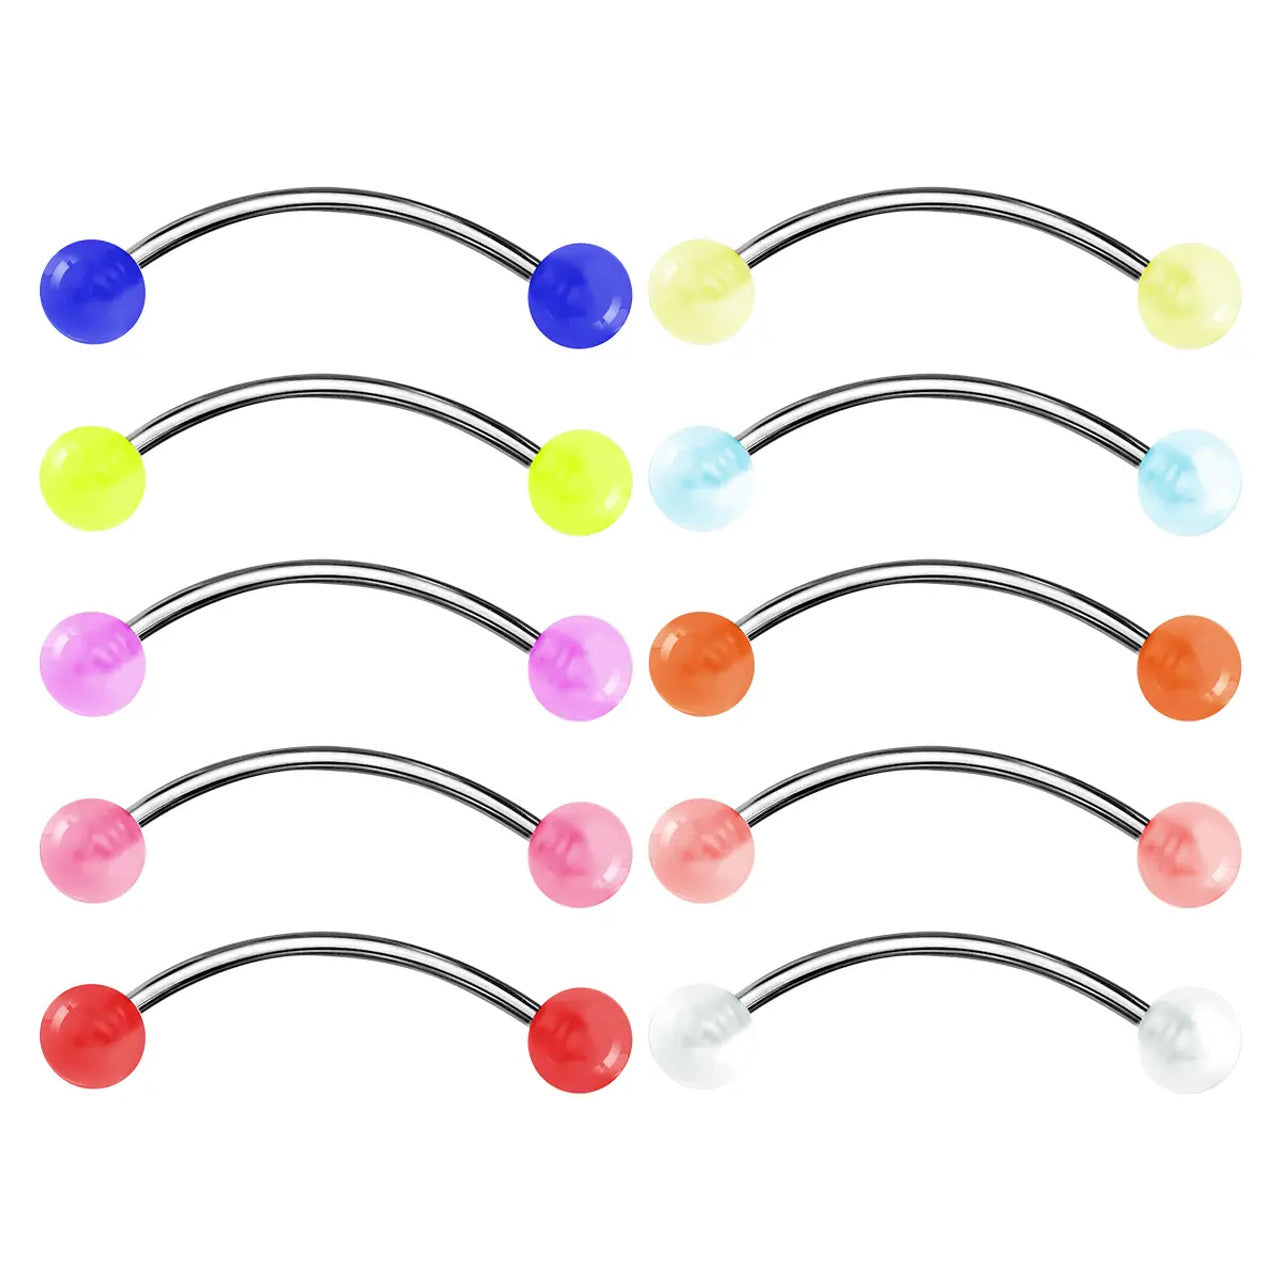 Surgical Steel Curved Barbell Tongue Ring 16 Gauge U/V Ball - 10 Pack